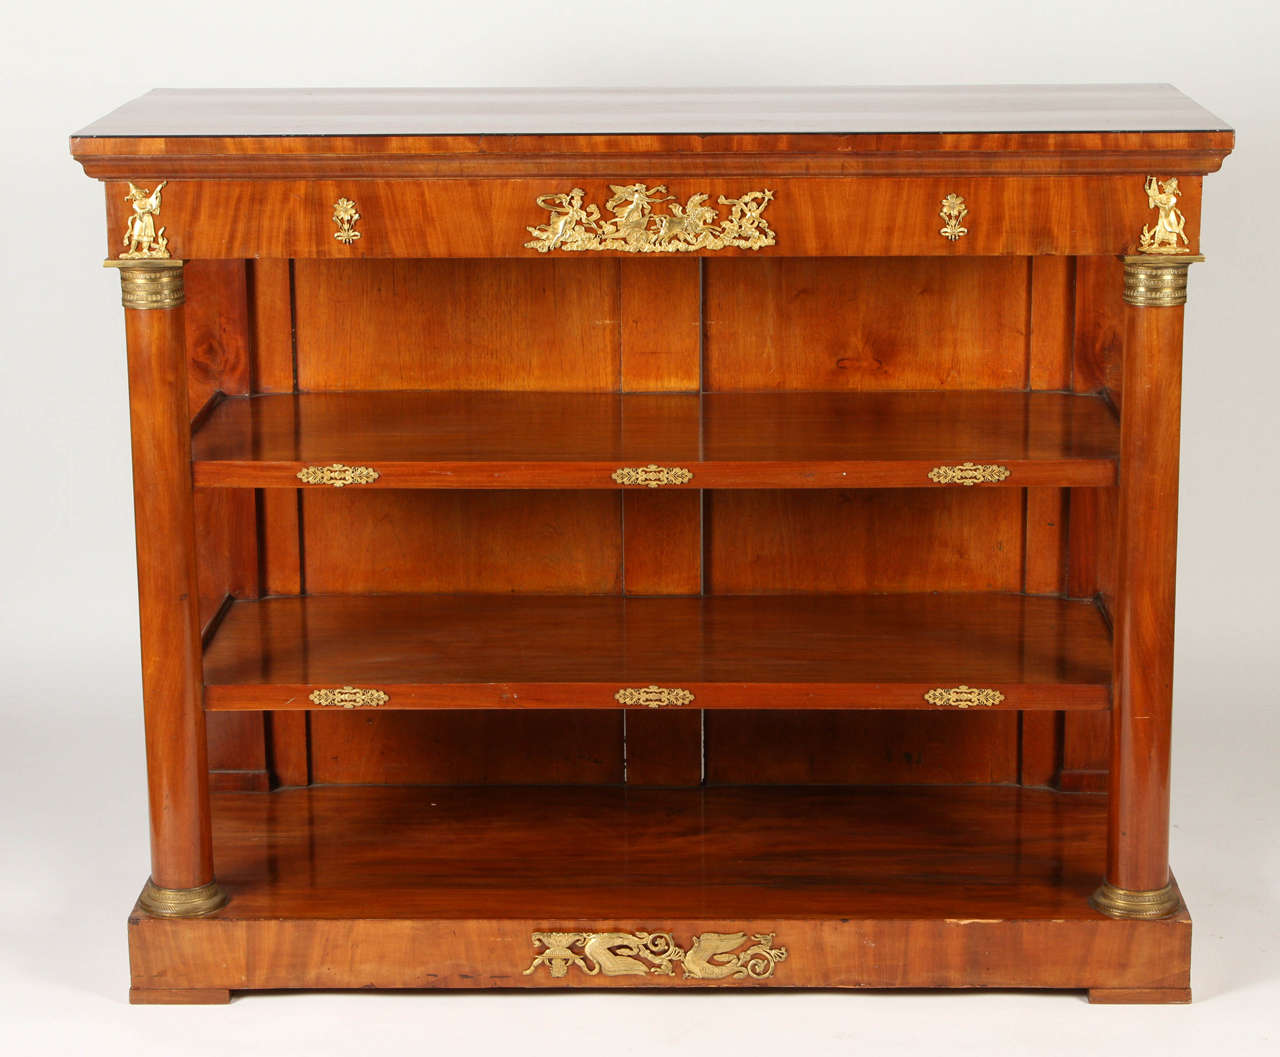 This French Empire console from the early 19th century is made from gorgeous burled amboyna. Round pilasters support two inset shelves and the frieze which is mounted with gilt bronze mounts in chinoiserie figures. This unique piece would be a